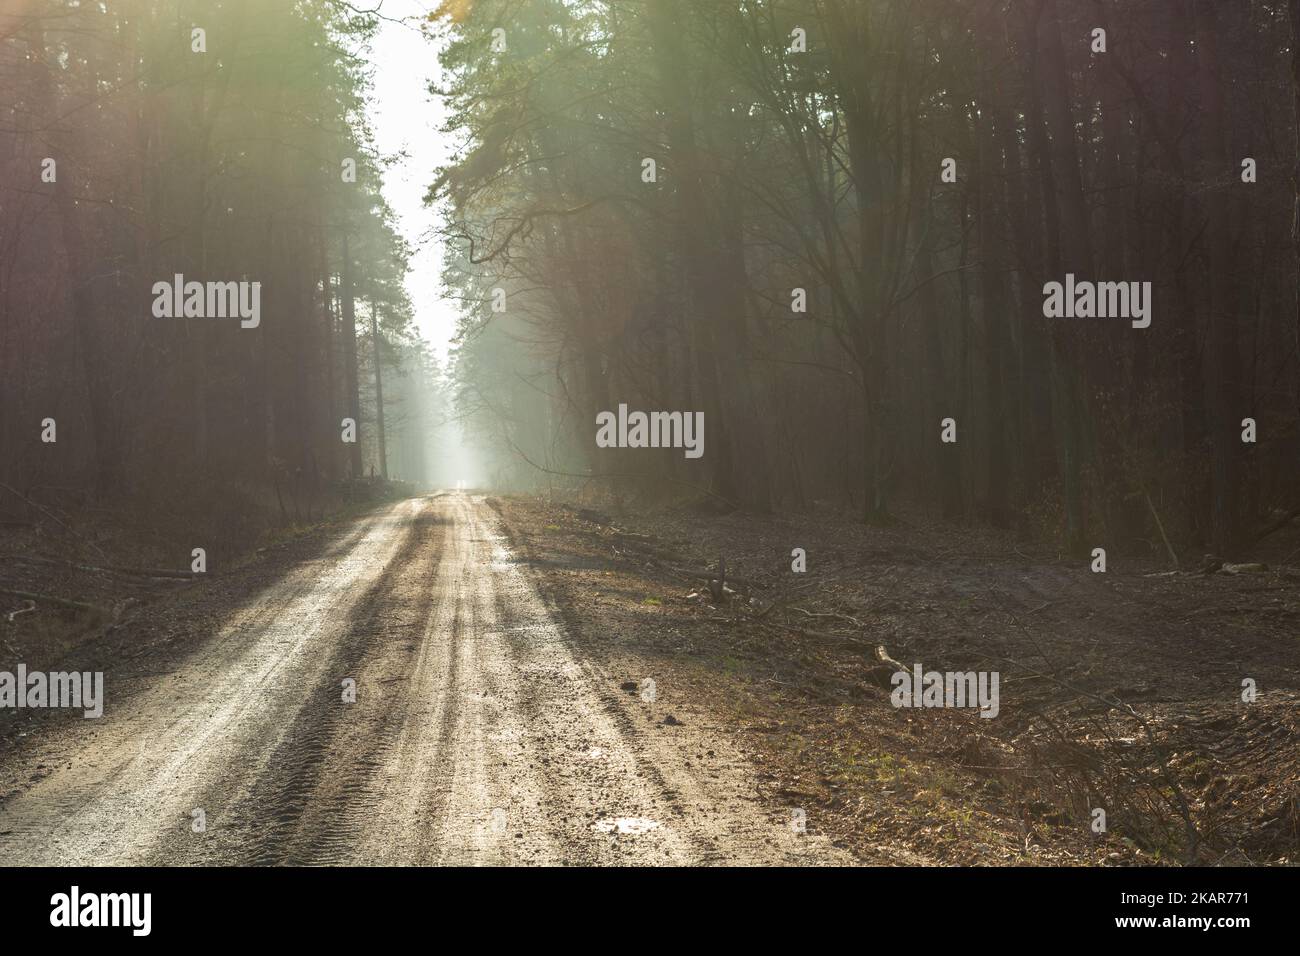 Dirt road through a misty dense forest in eastern Poland Stock Photo